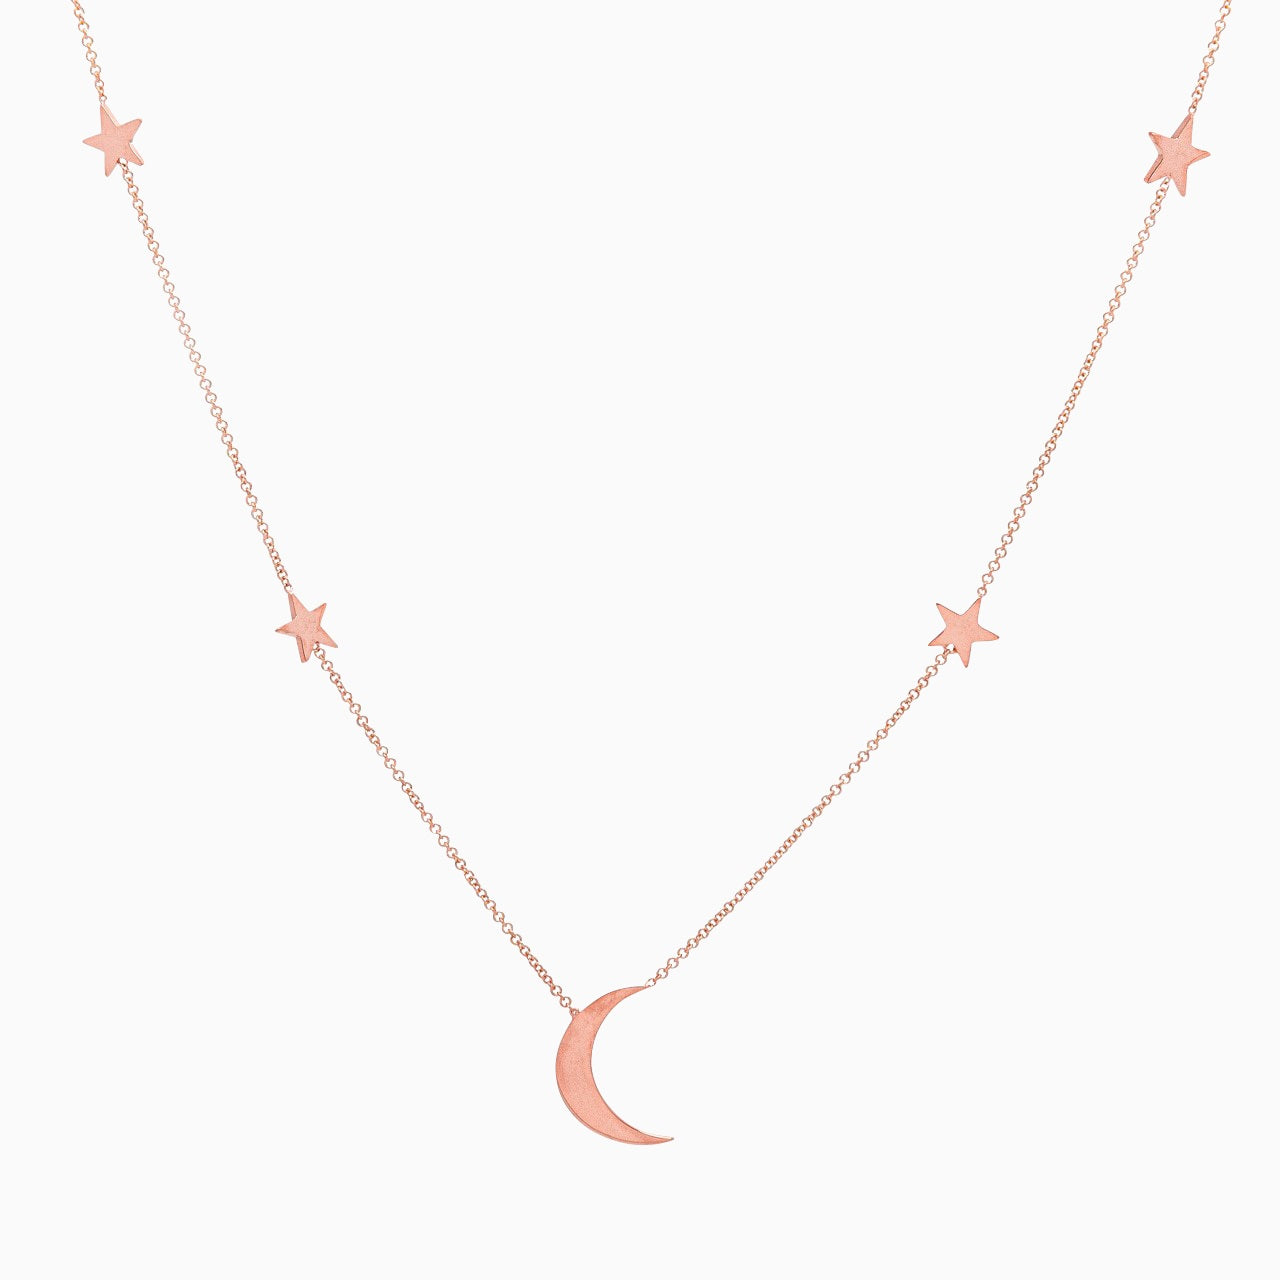 14k Rose Gold Shoot for the Moon Station Necklace